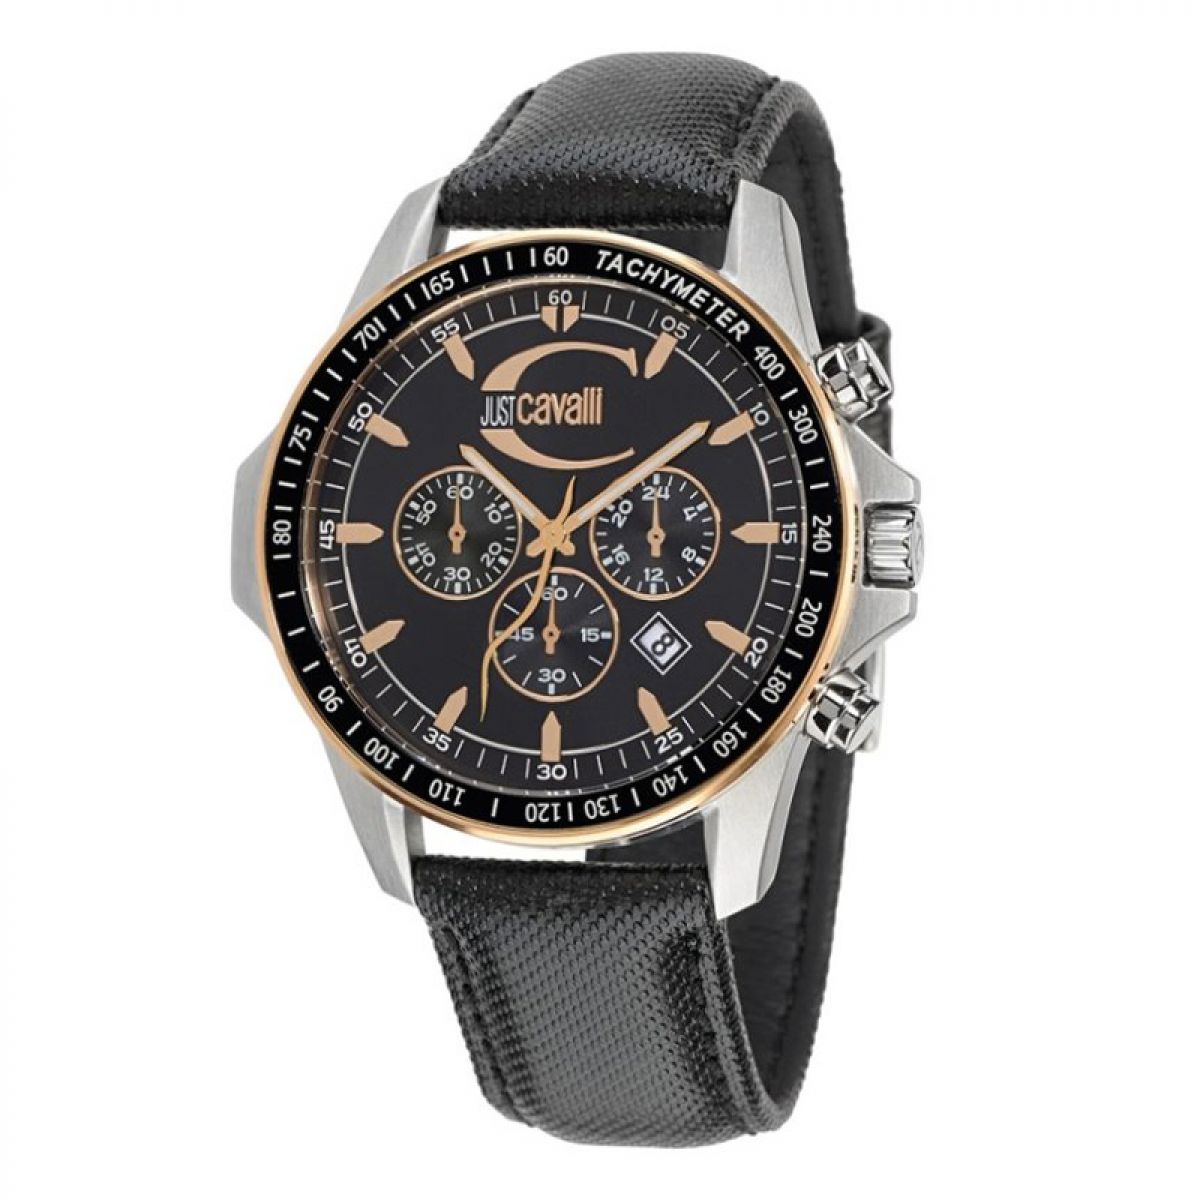 Just Cavalli Actually Chronograph Steel 44mm | R7271693125